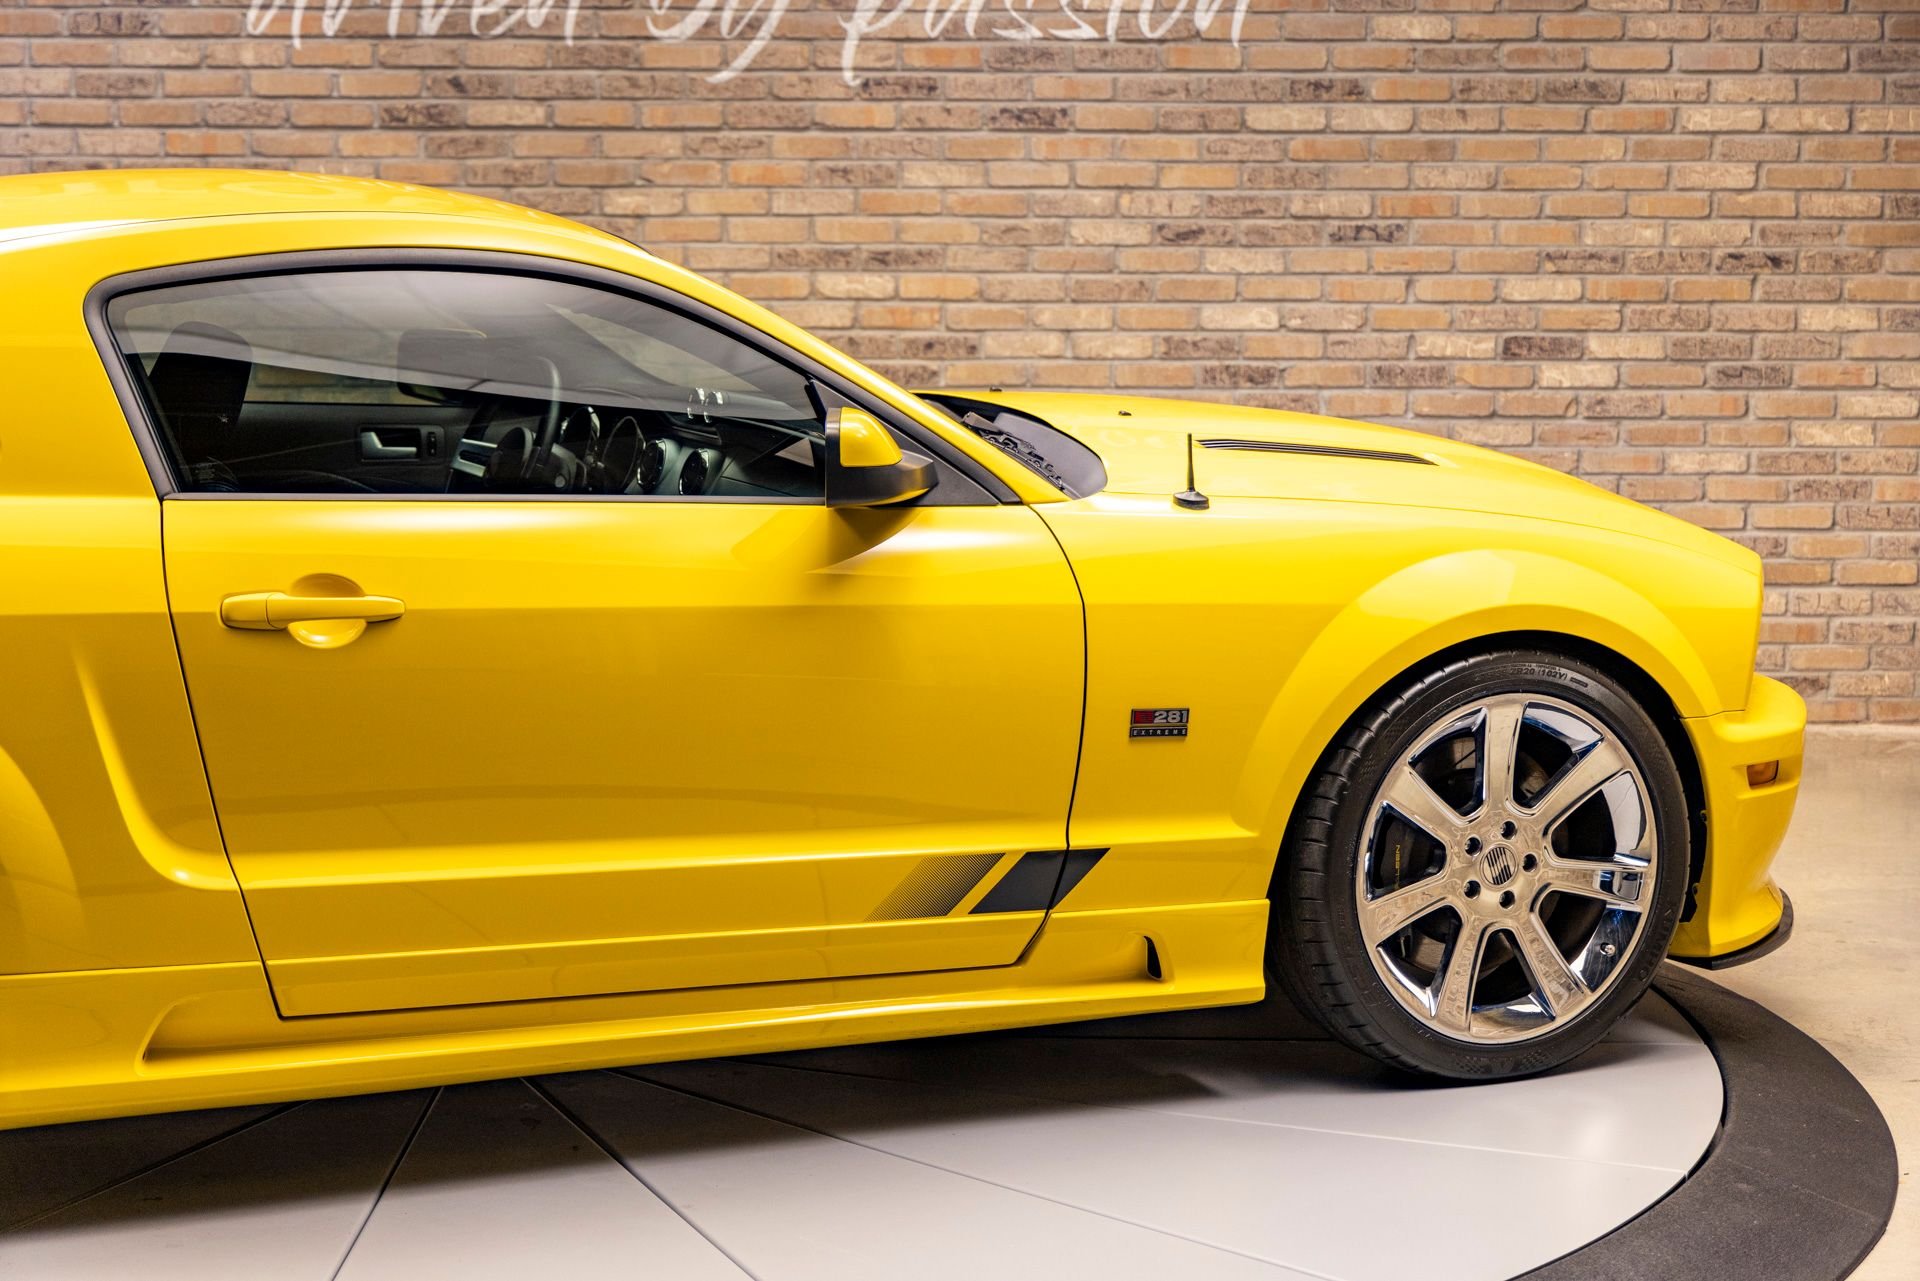 813187 | 2006 Ford Mustang Saleen S281-E | Throttlestop | Automotive and Motorcycle Consignment Dealer